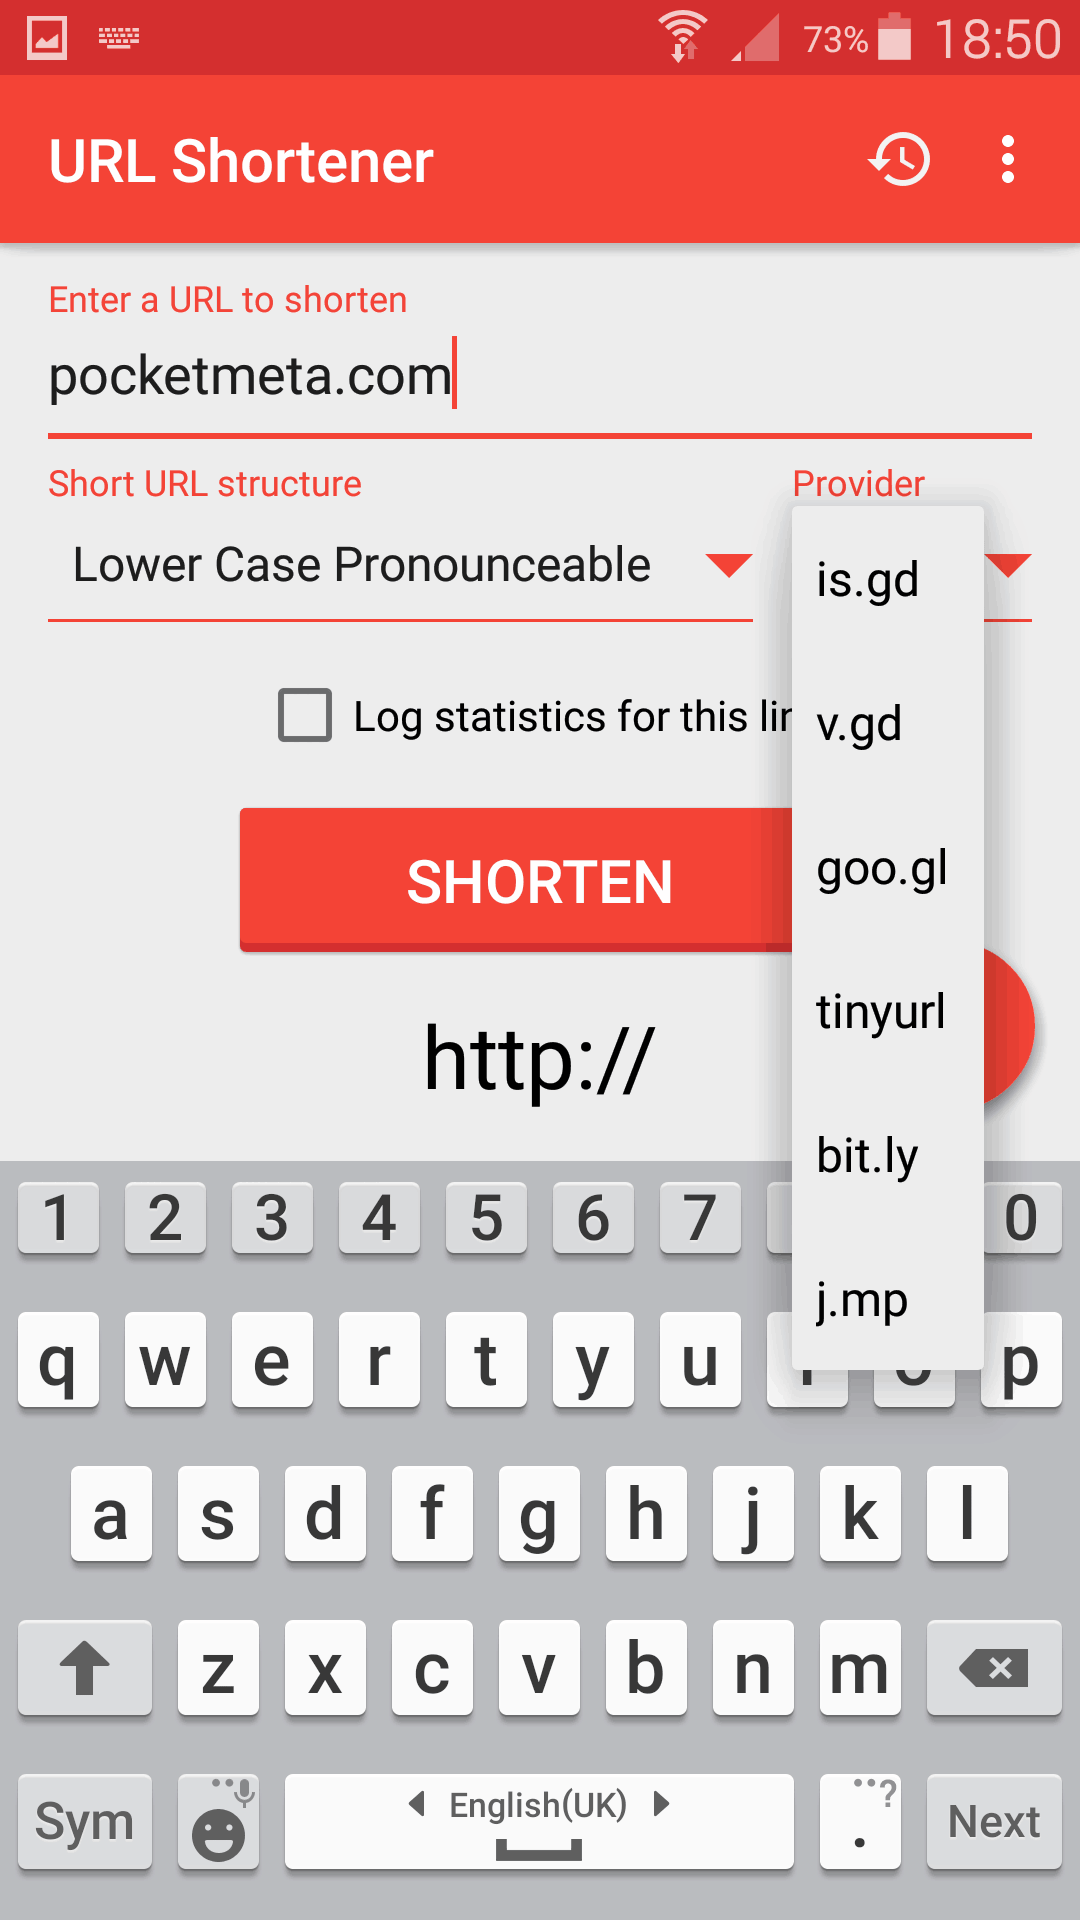 [Guide] Easily share custom short URLs from your Android device